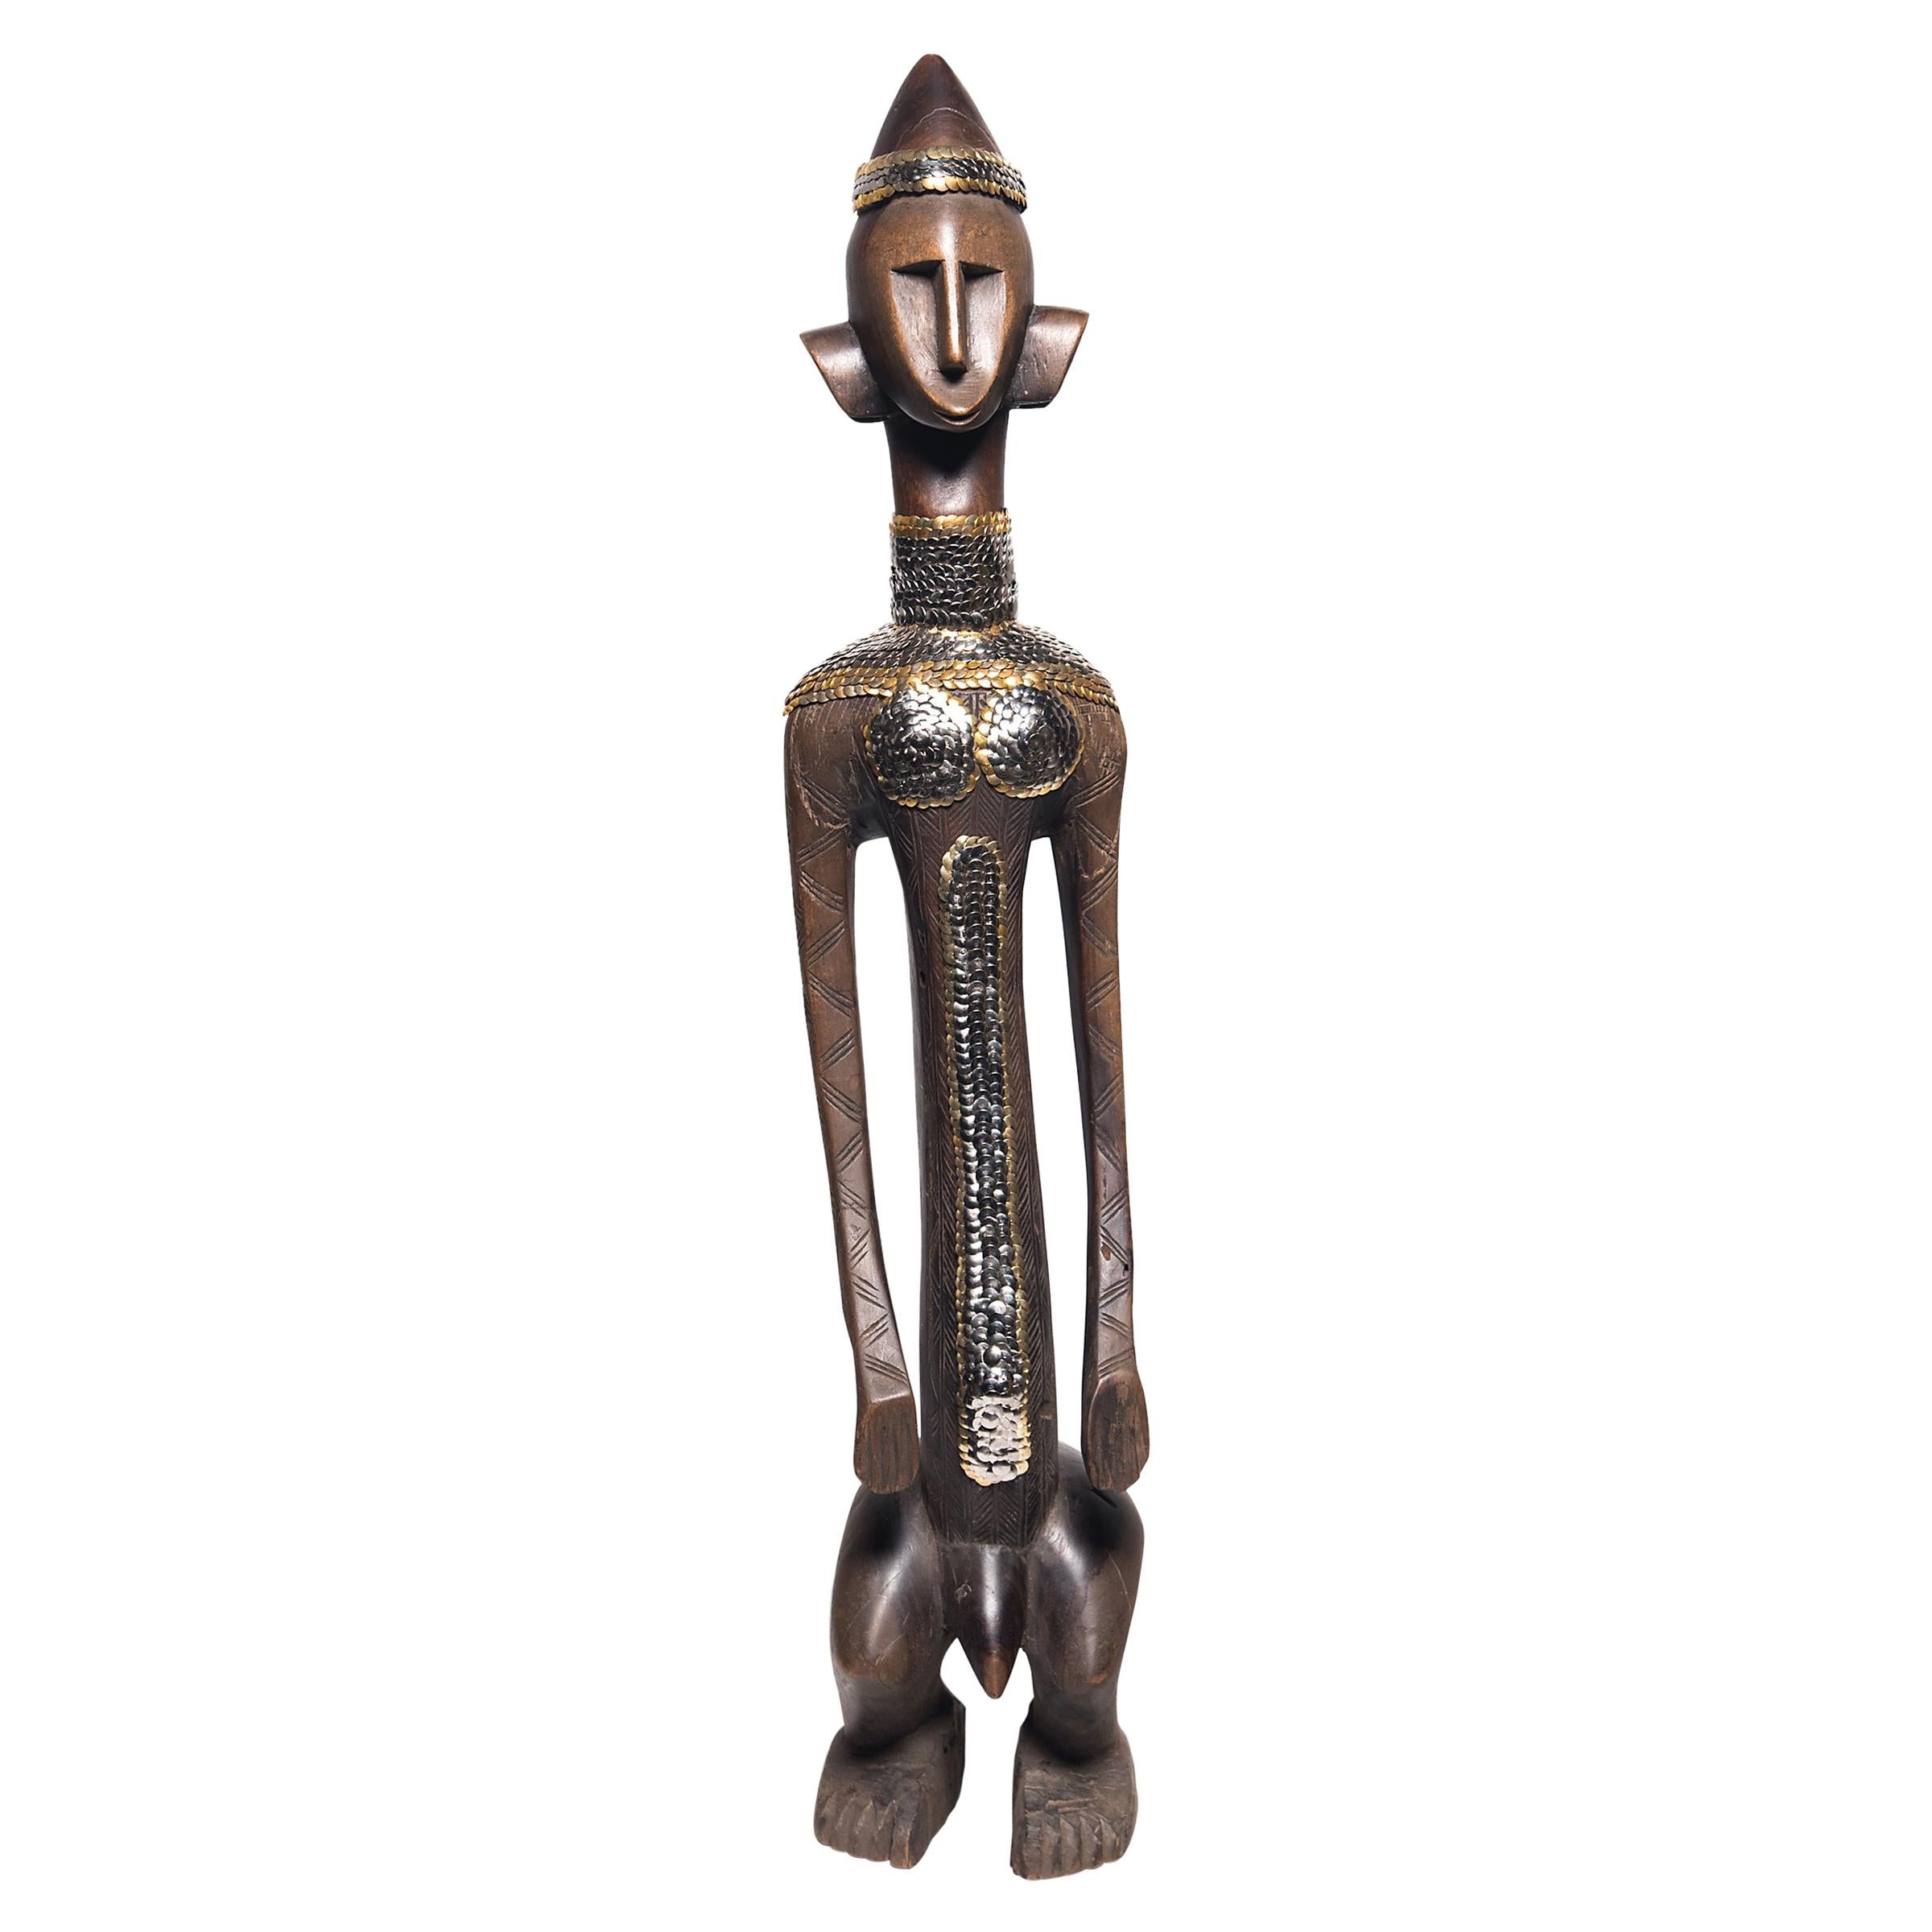 Malian Sculptures and Carvings